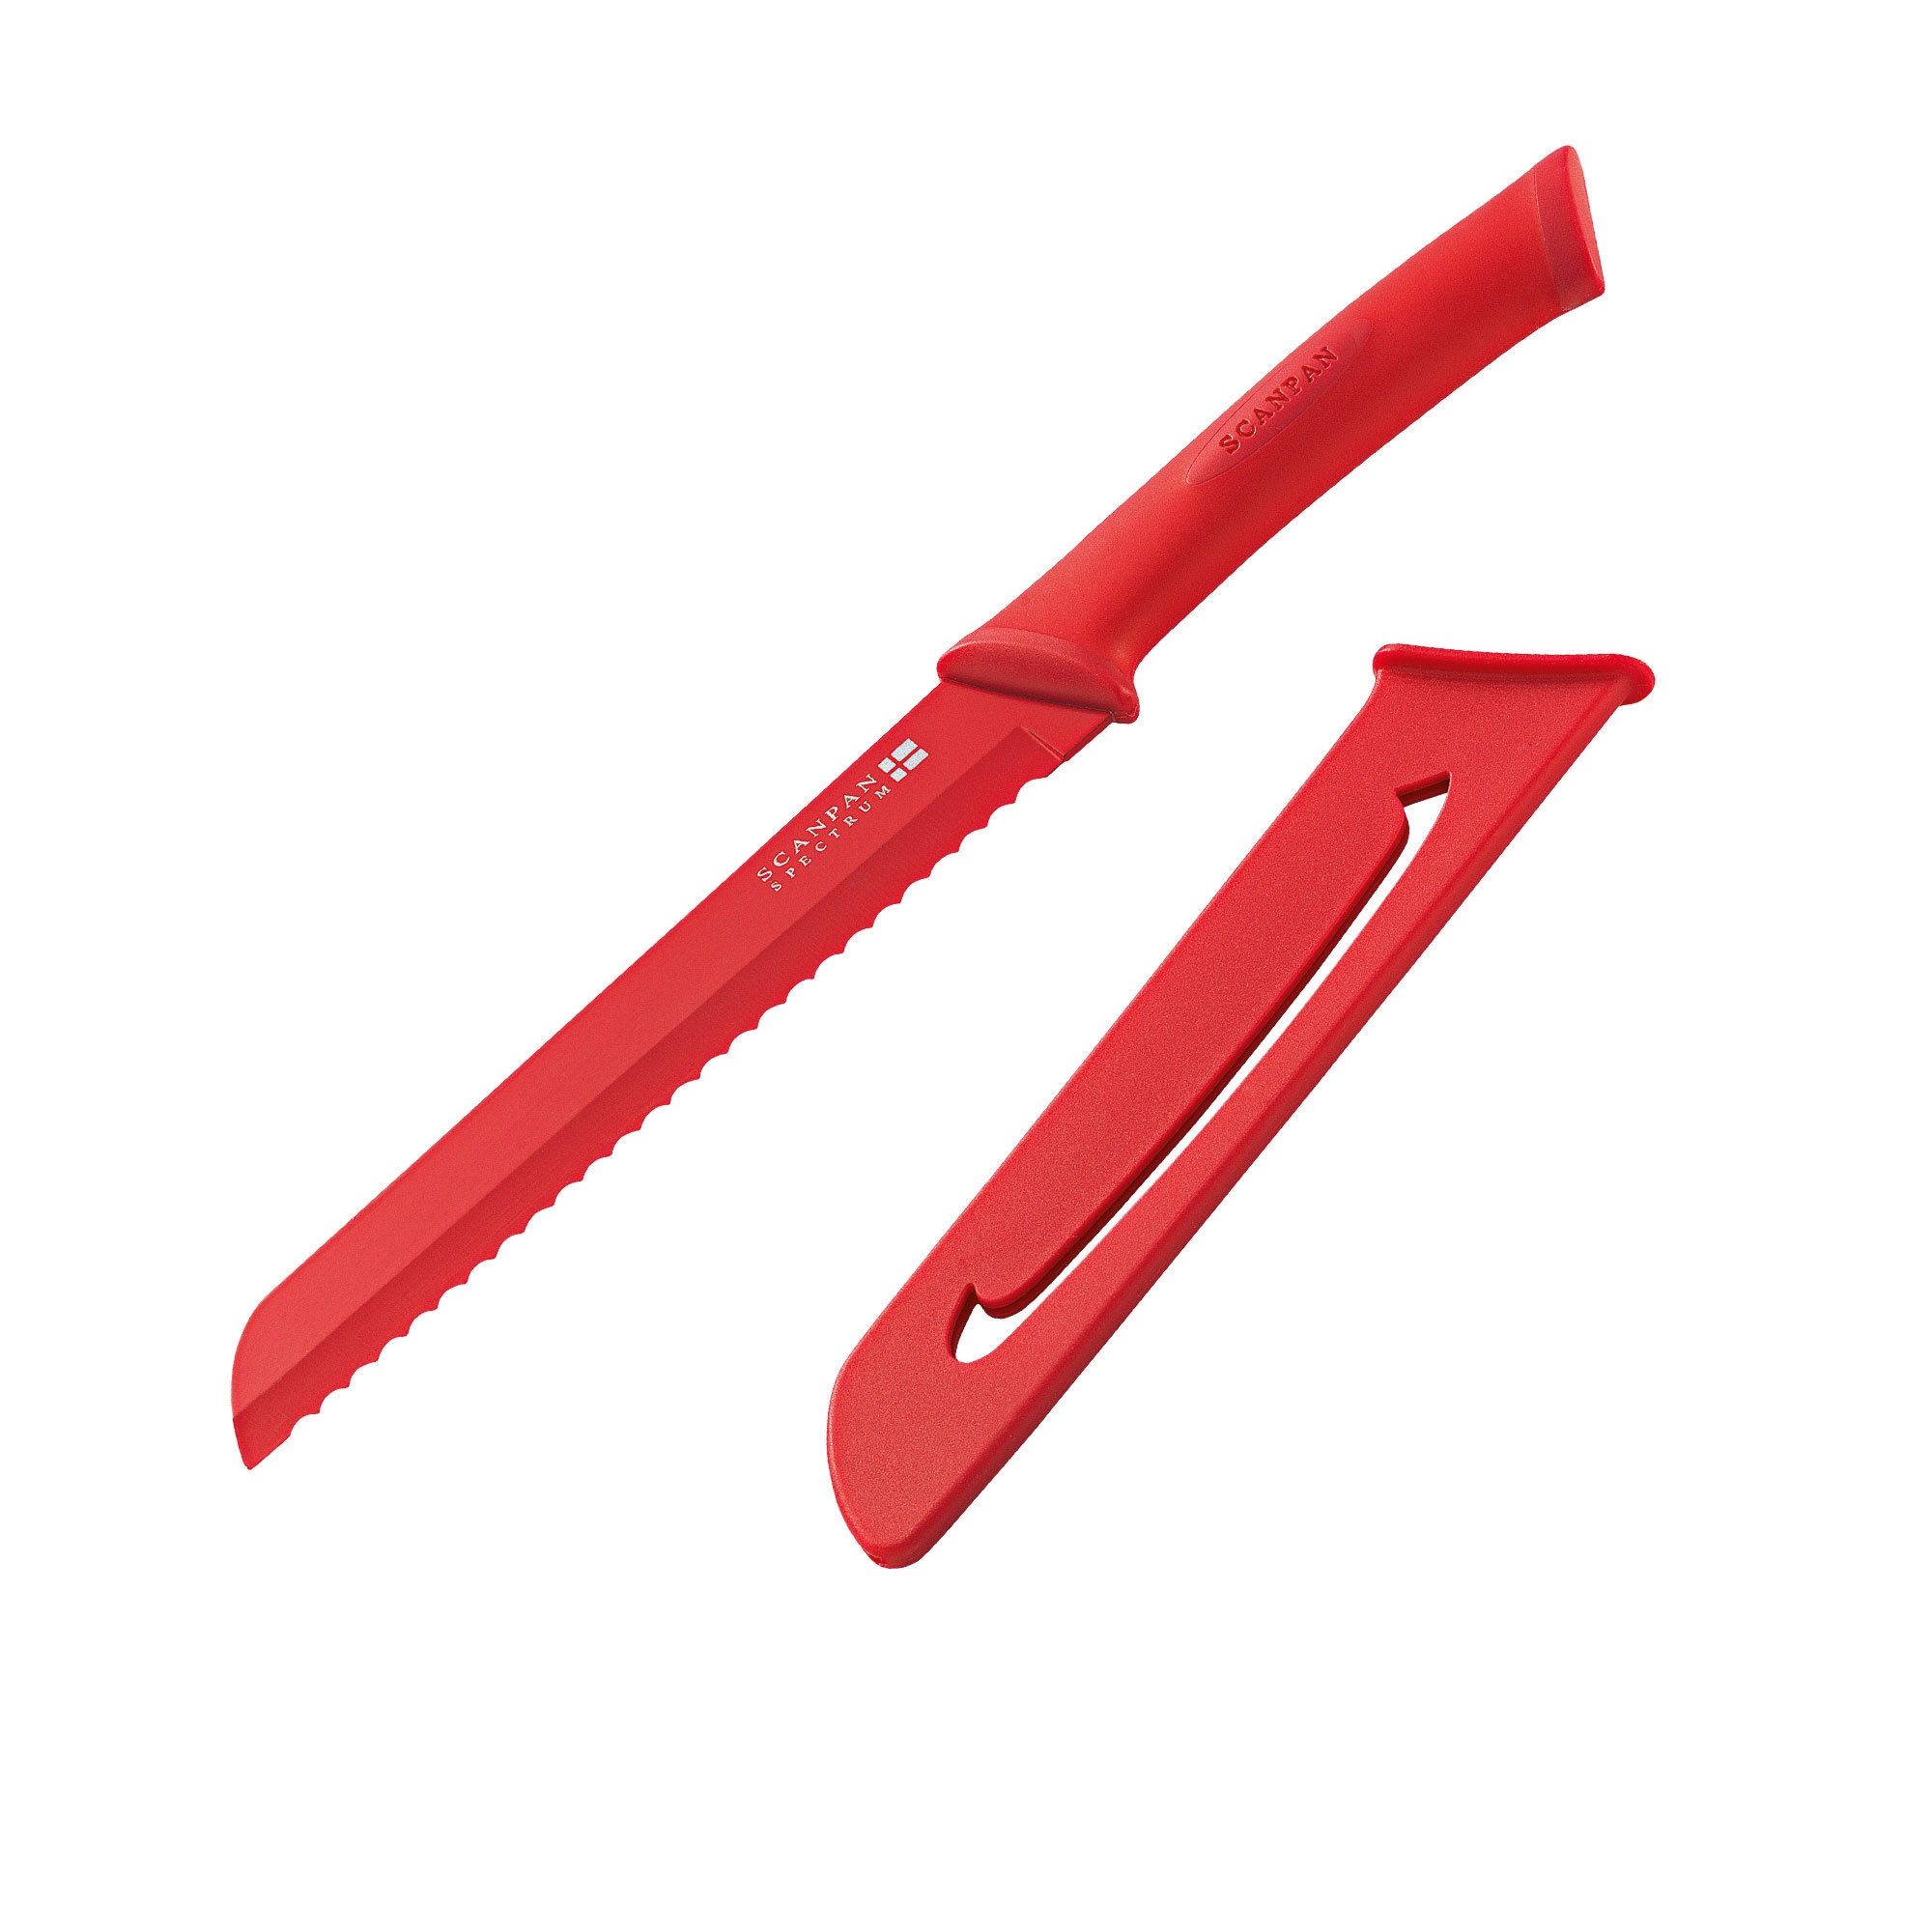 Scanpan Spectrum Soft Touch Bread Knife Red Image 1